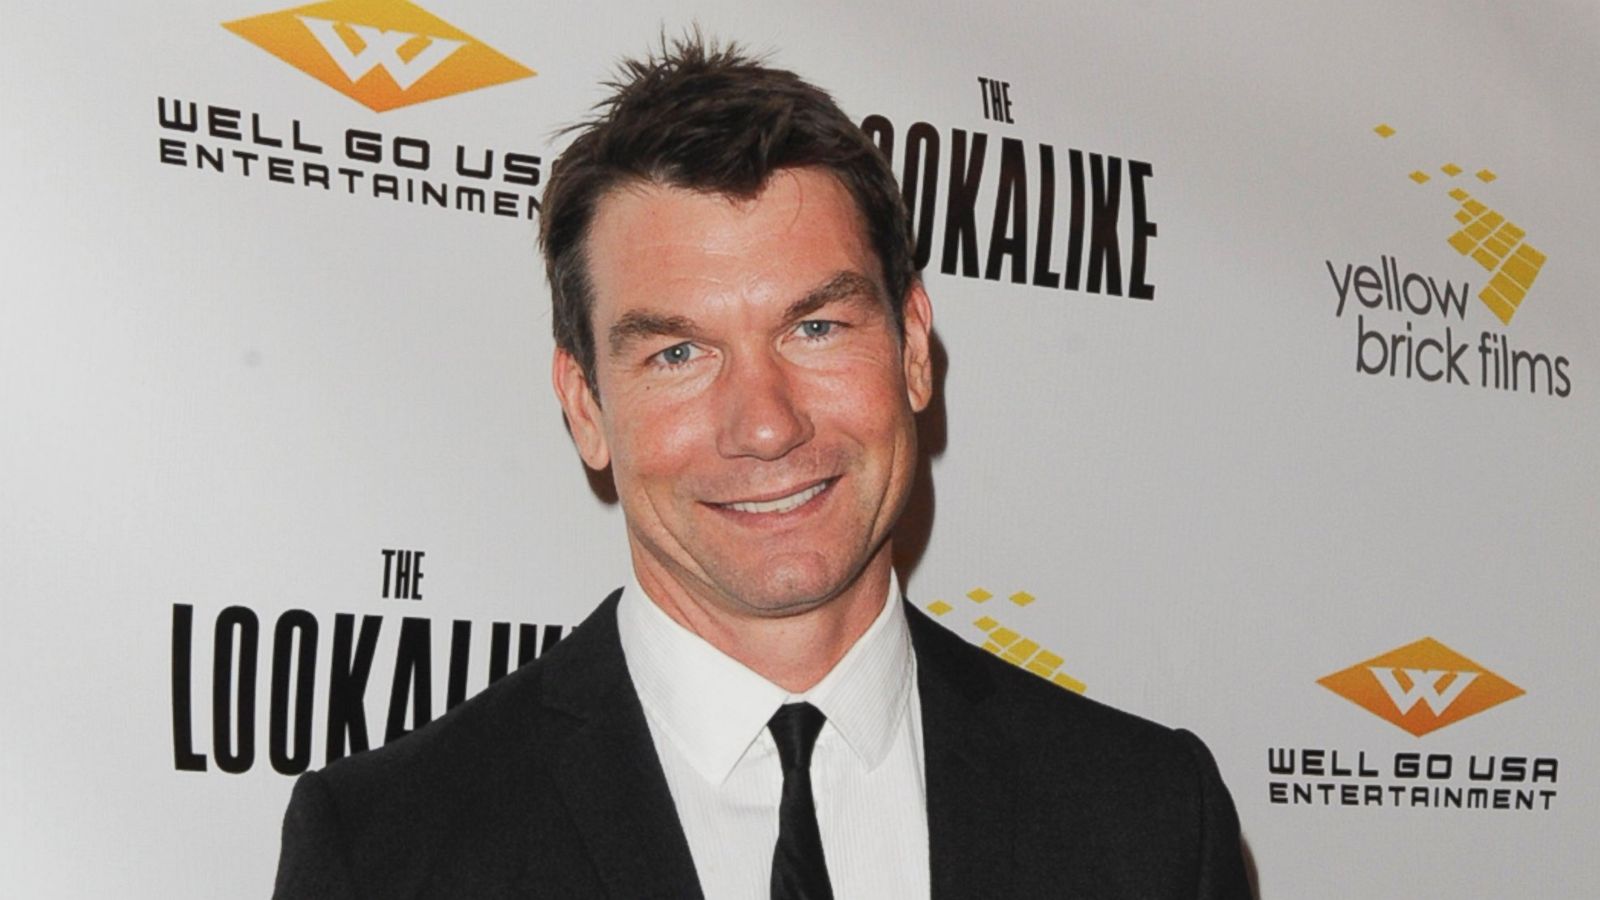 Jerry O’Connell Disapproves Of John Stamos’ Memoir Mentioning Rebecca Romijn